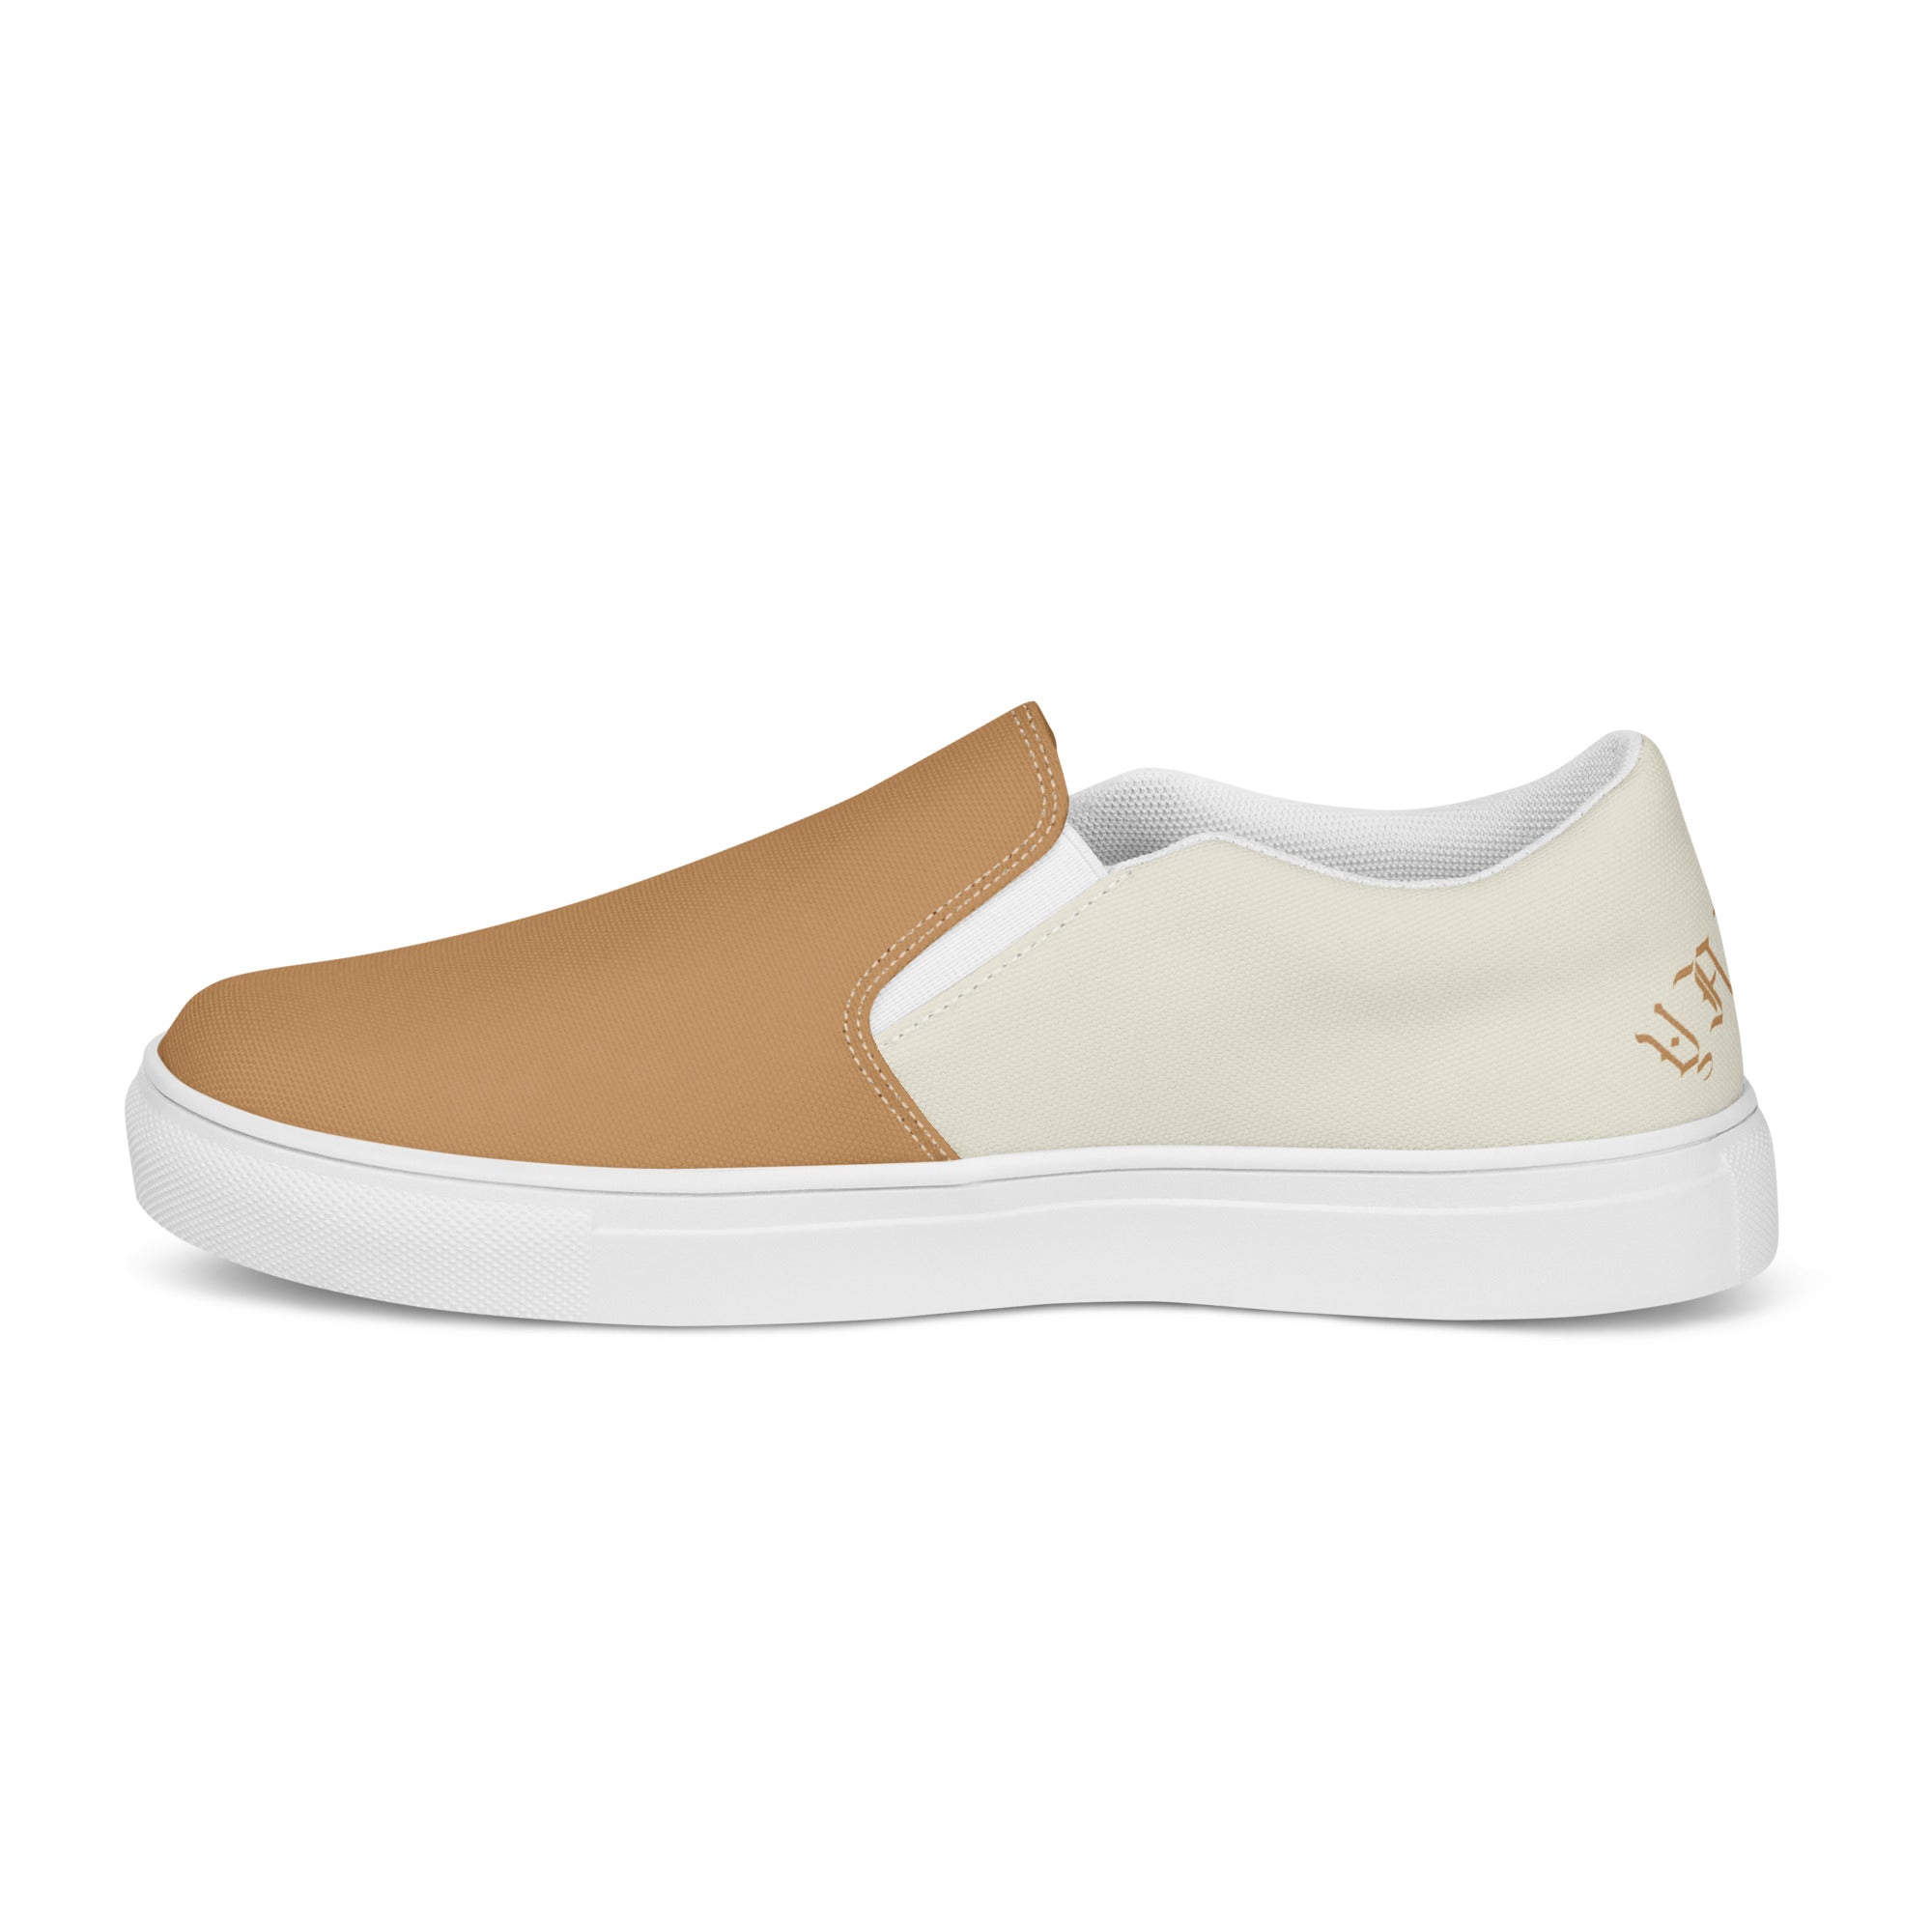 Yahweh Women’s Slip On Canvas Shoes Cream Size: 5 Jesus Passion Apparel